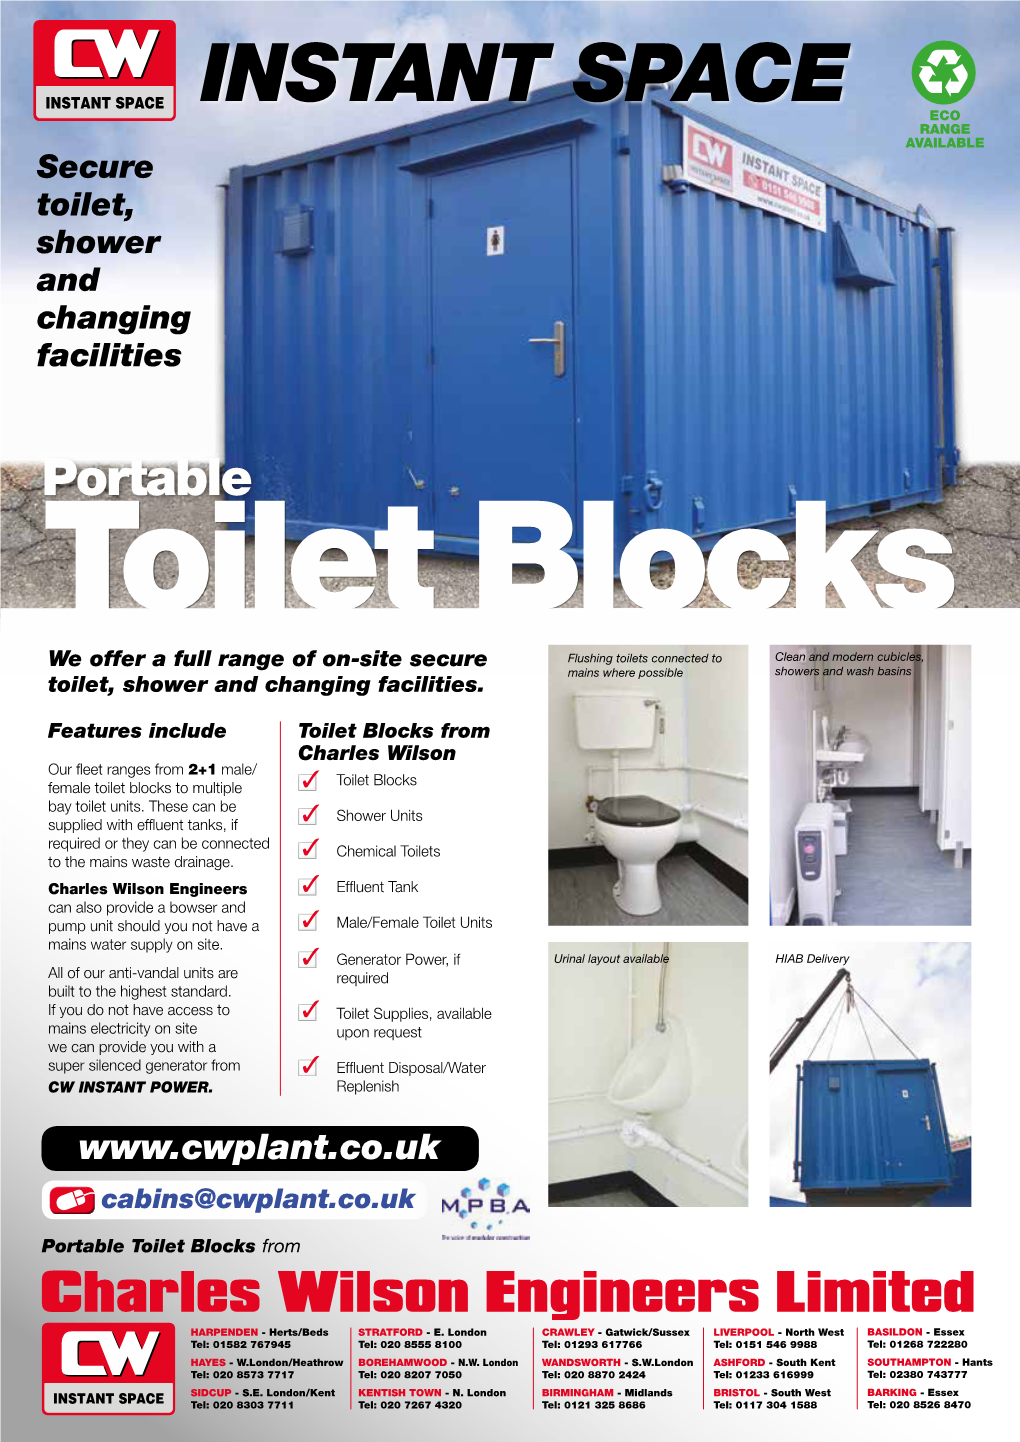 INSTANT SPACE ECO RANGE AVAILABLE Secure Toilet, Shower and Changing Facilities